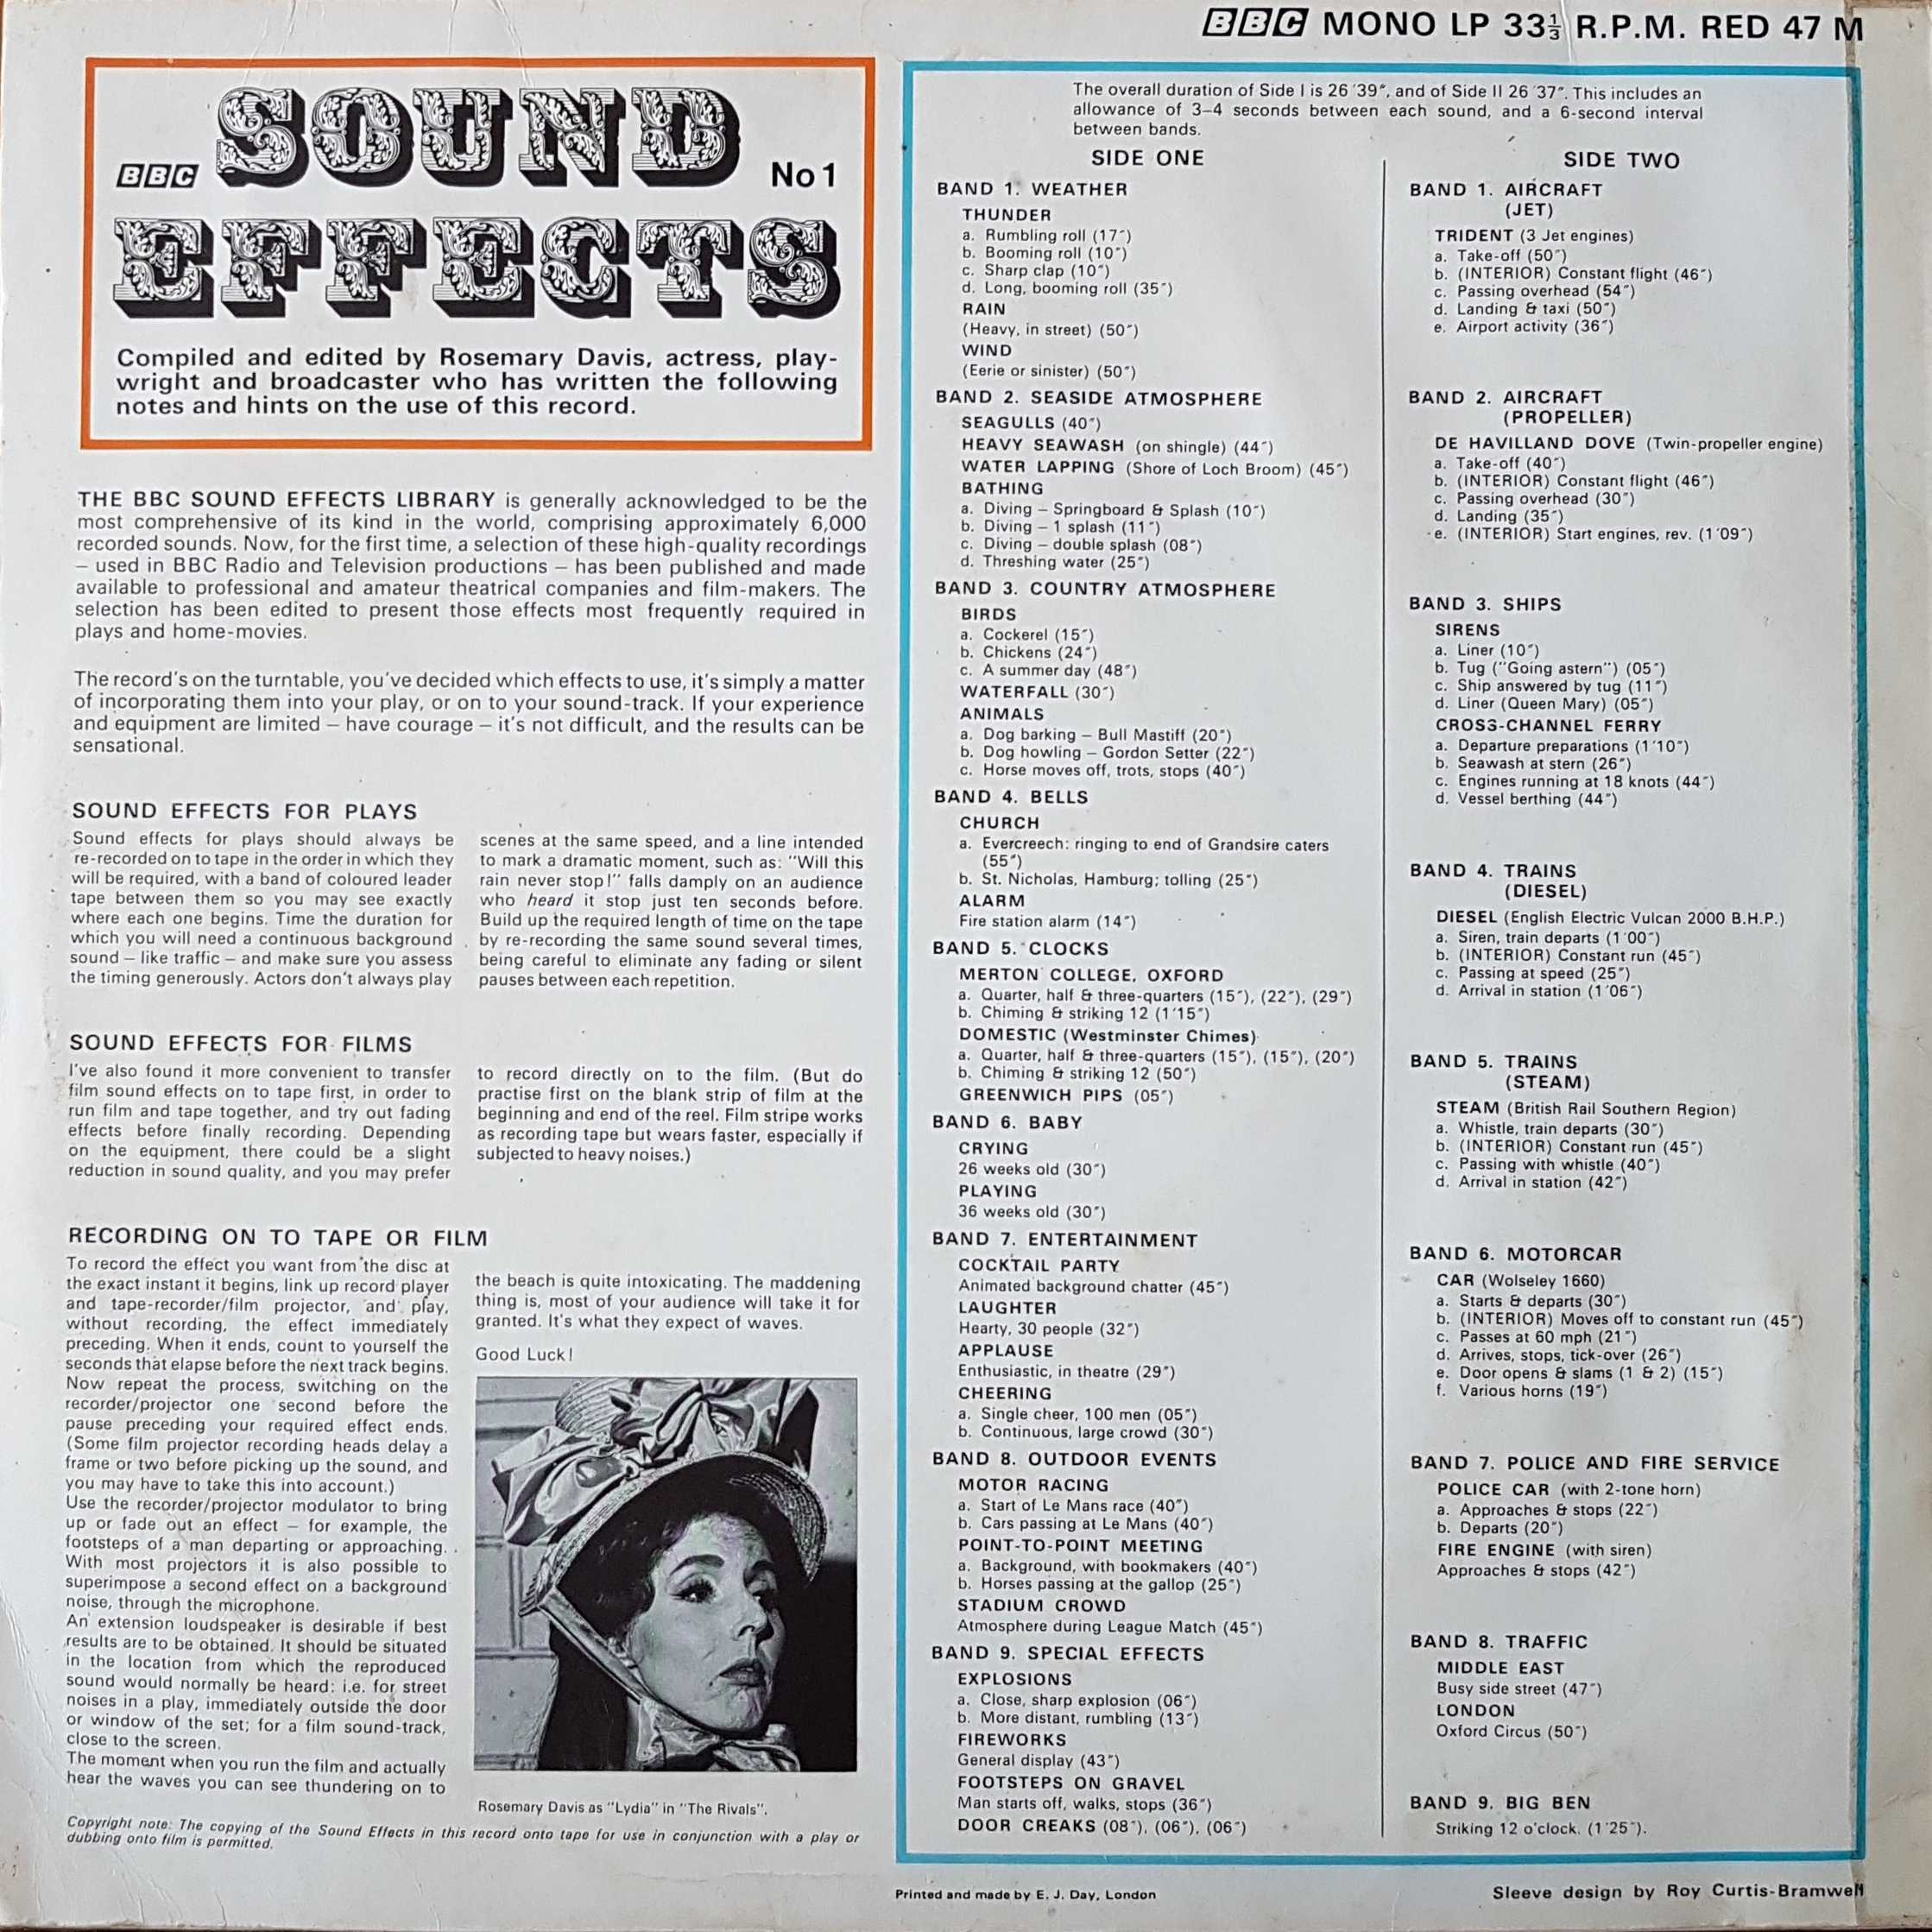 Picture of RED 47 Sound effects No. 1 by artist Various from the BBC records and Tapes library